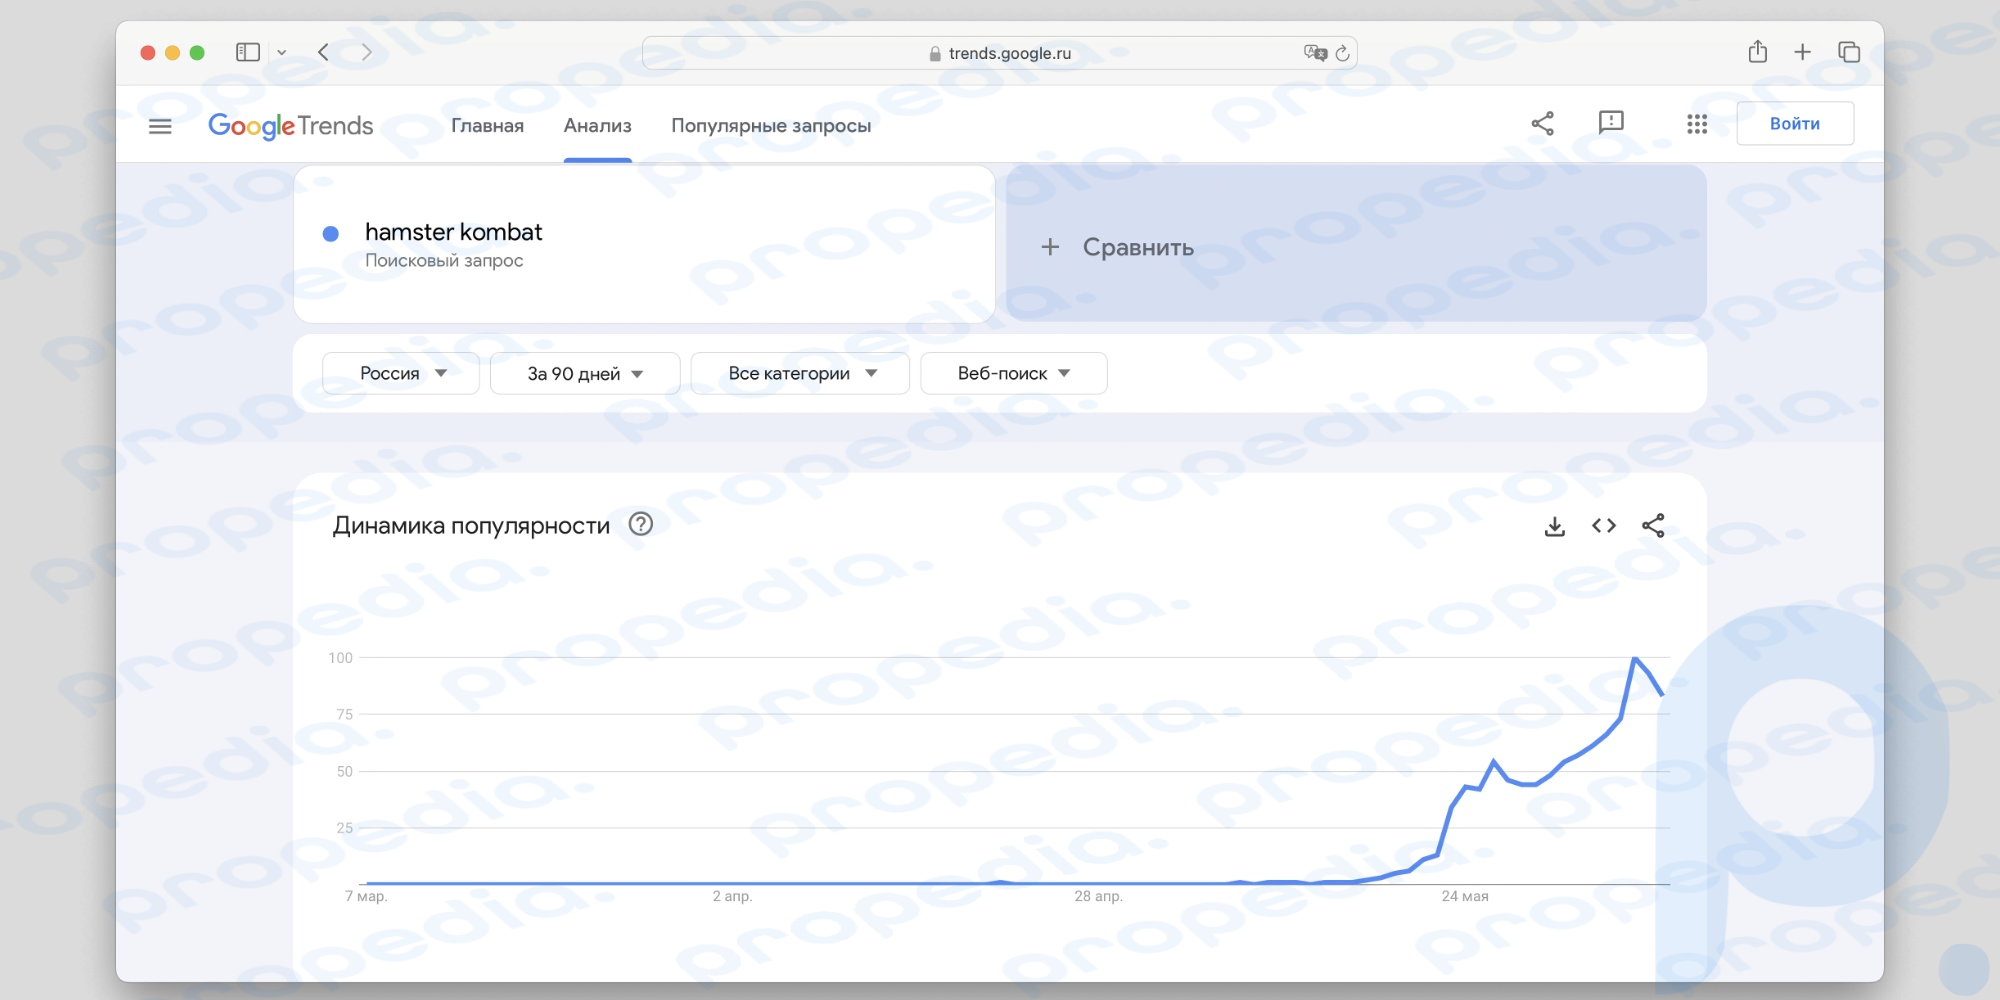 Until the end of May, few people were interested in the existence of the game. Screenshot: Google Trends